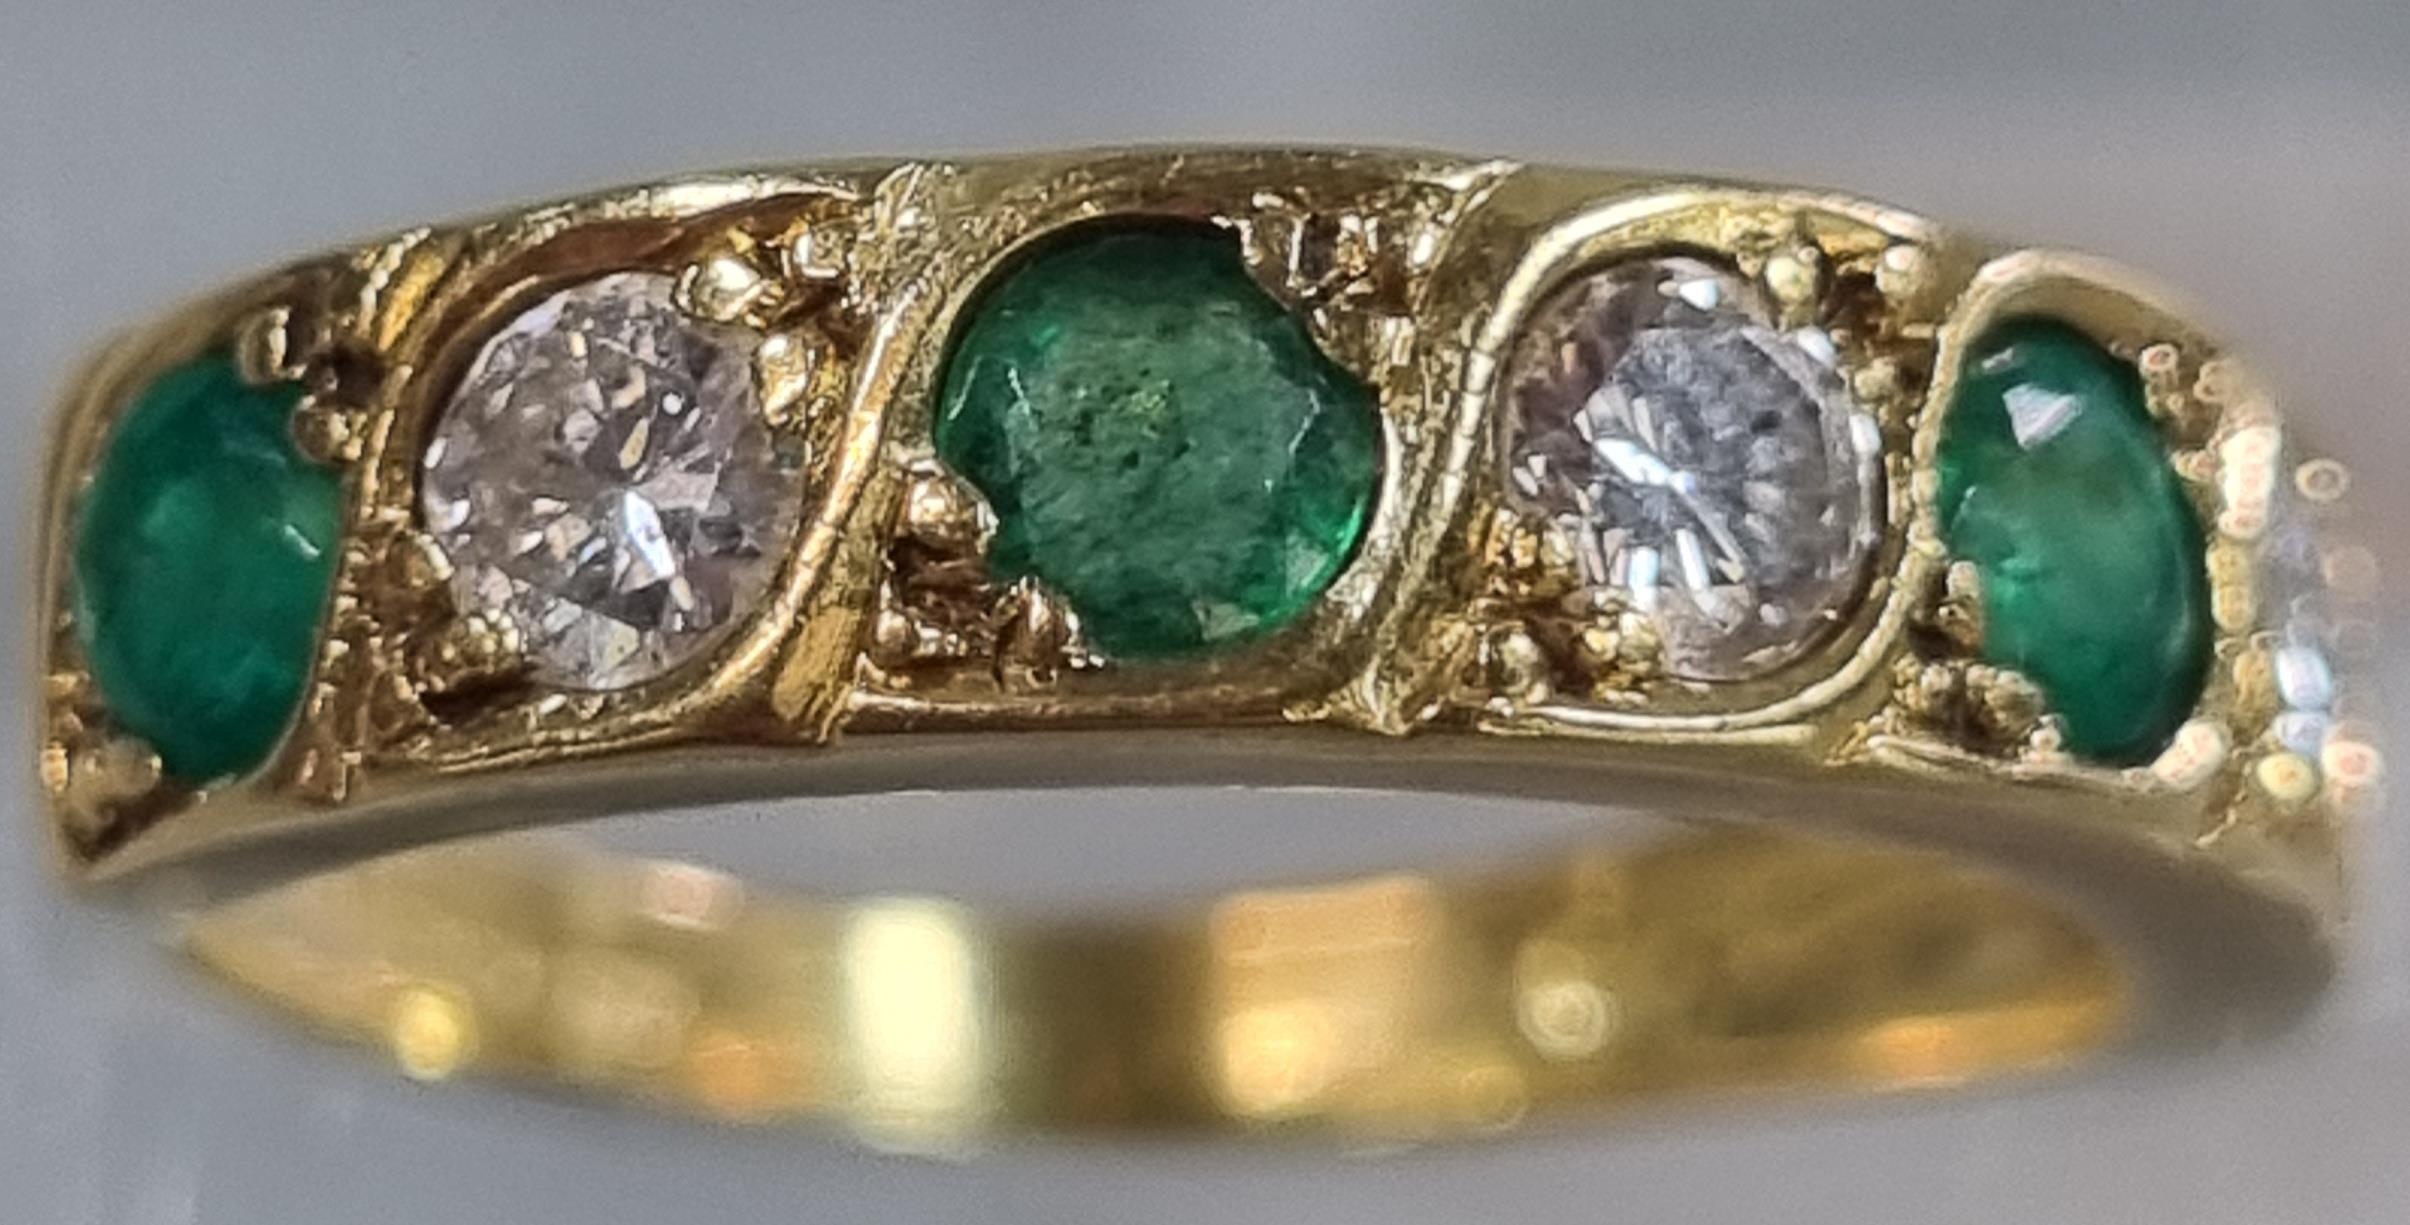 18ct gold diamond and emerald seven stone ring. 3g approx. Size J. (B.P. 21% + VAT)